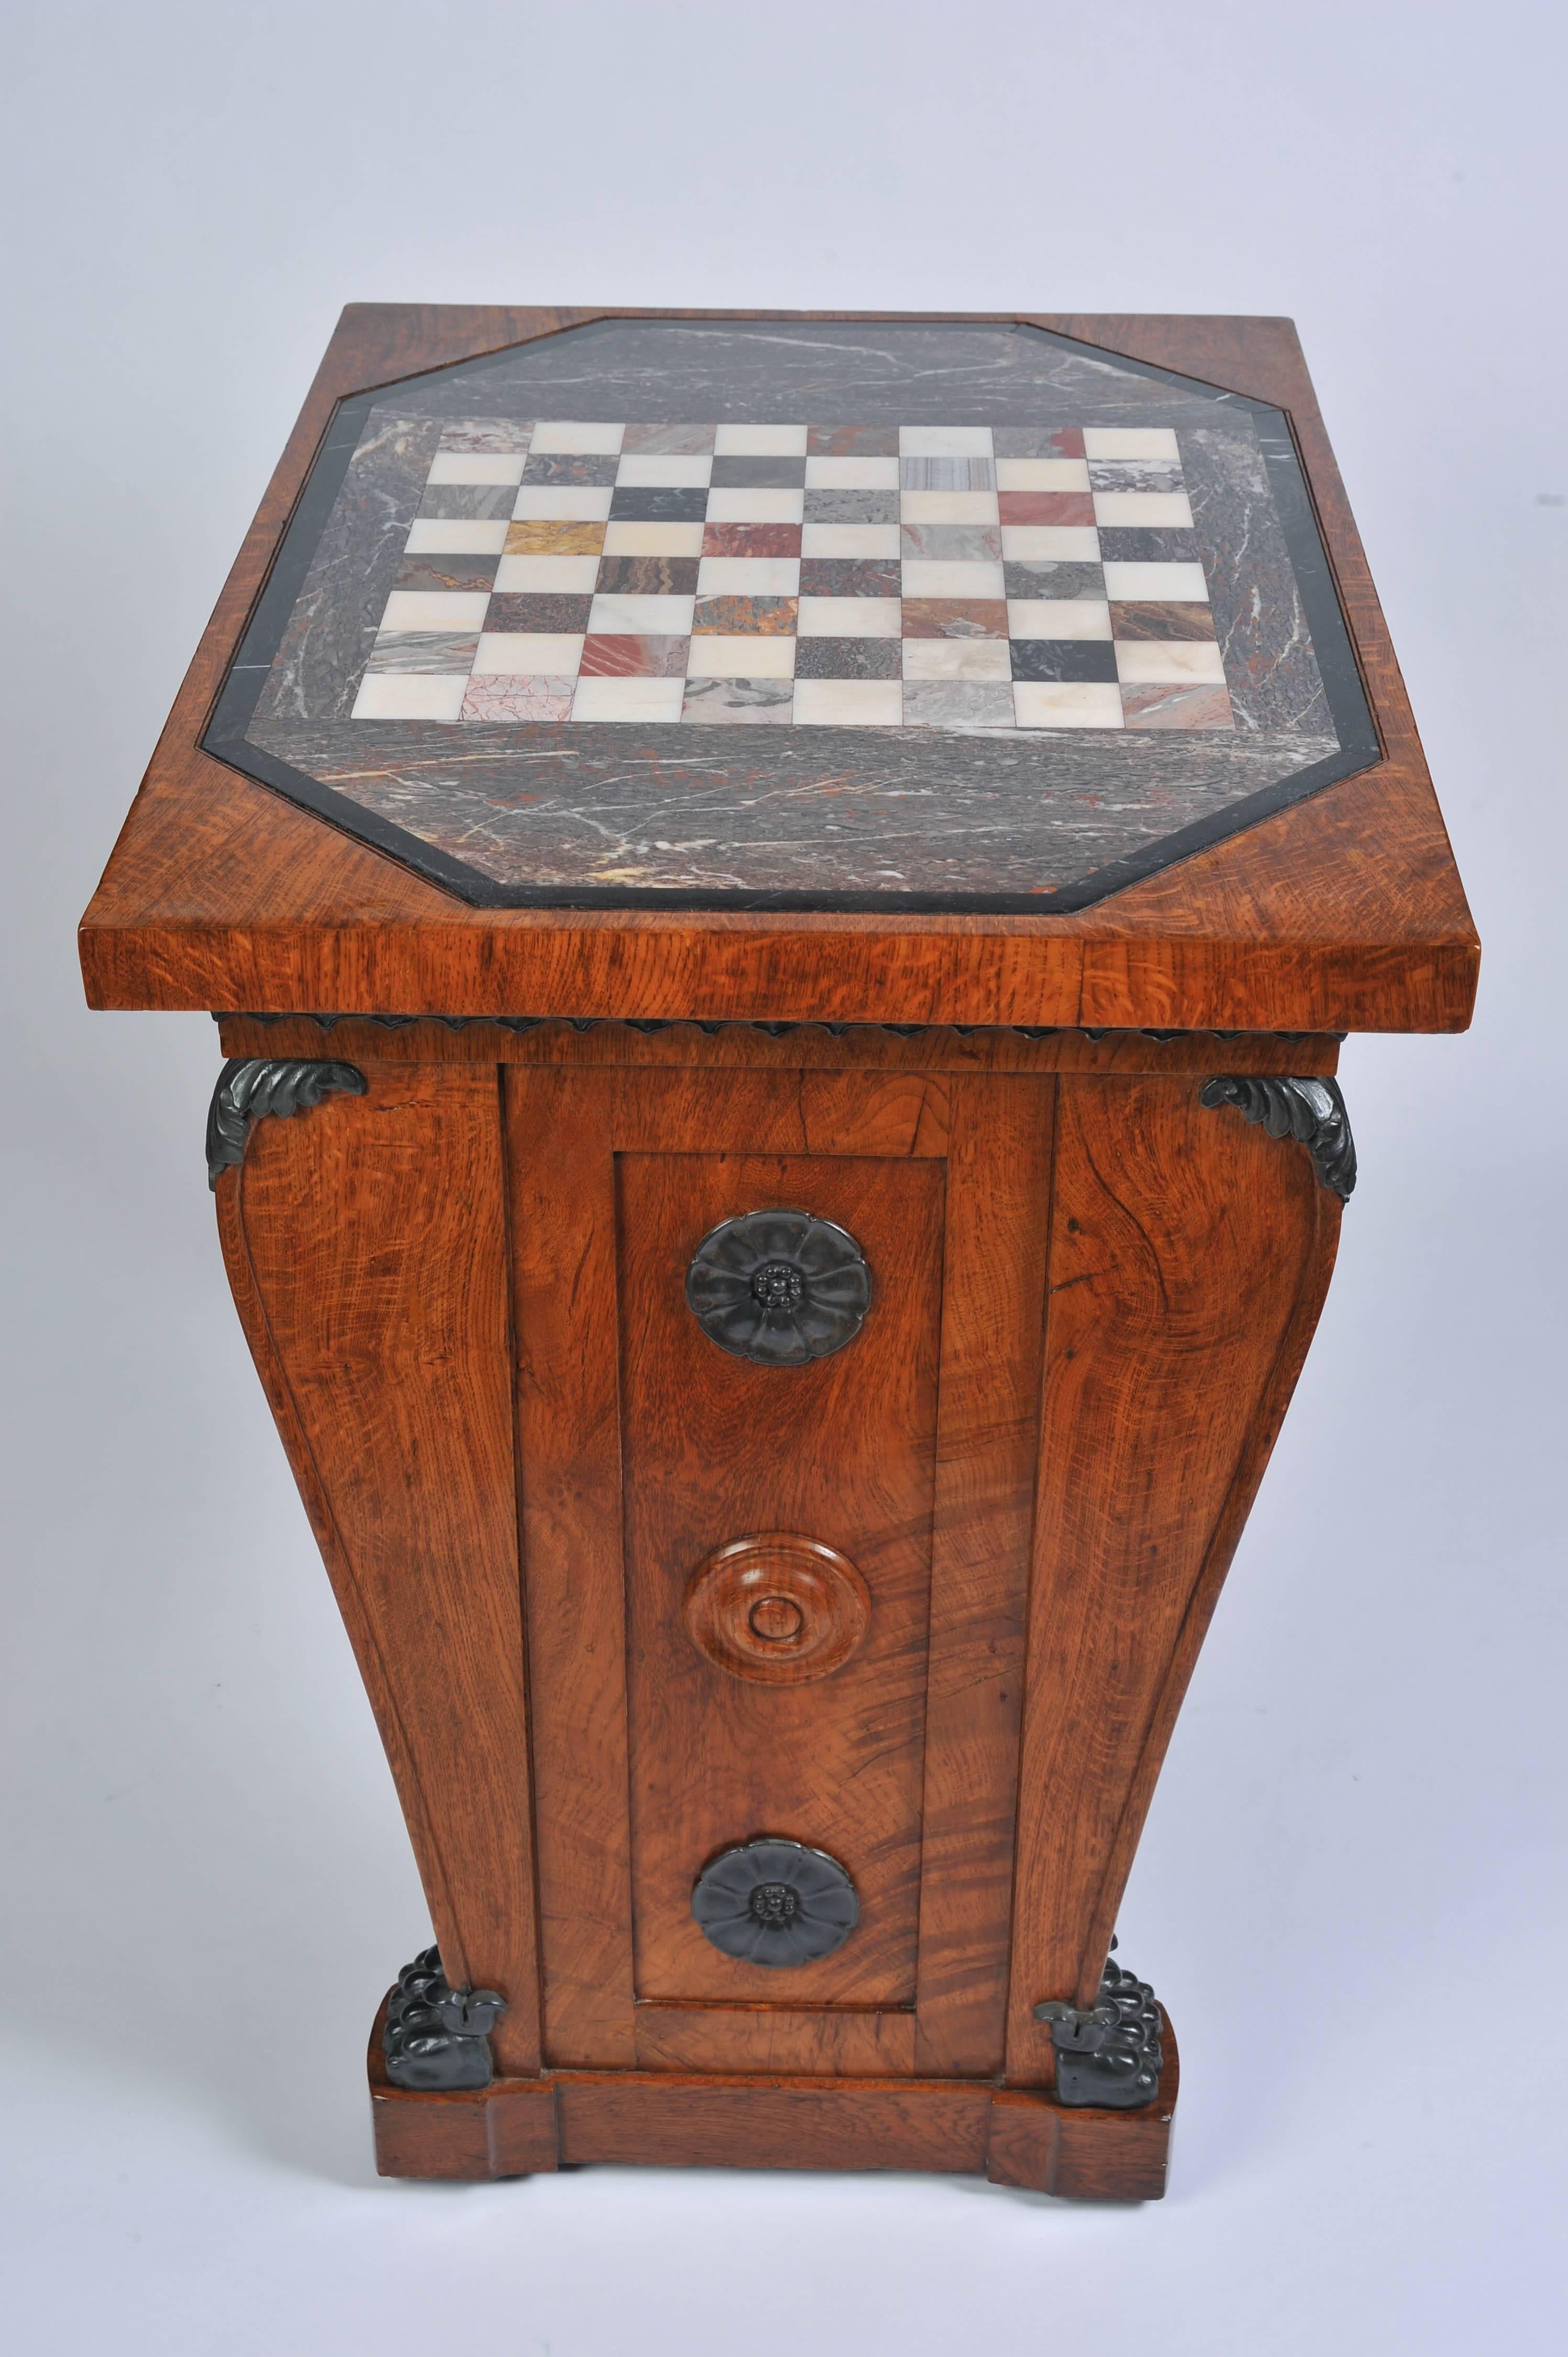 Regency Pollard Oak and Marble Chess Table by G. Bullock to Designs by T. Hope For Sale 2